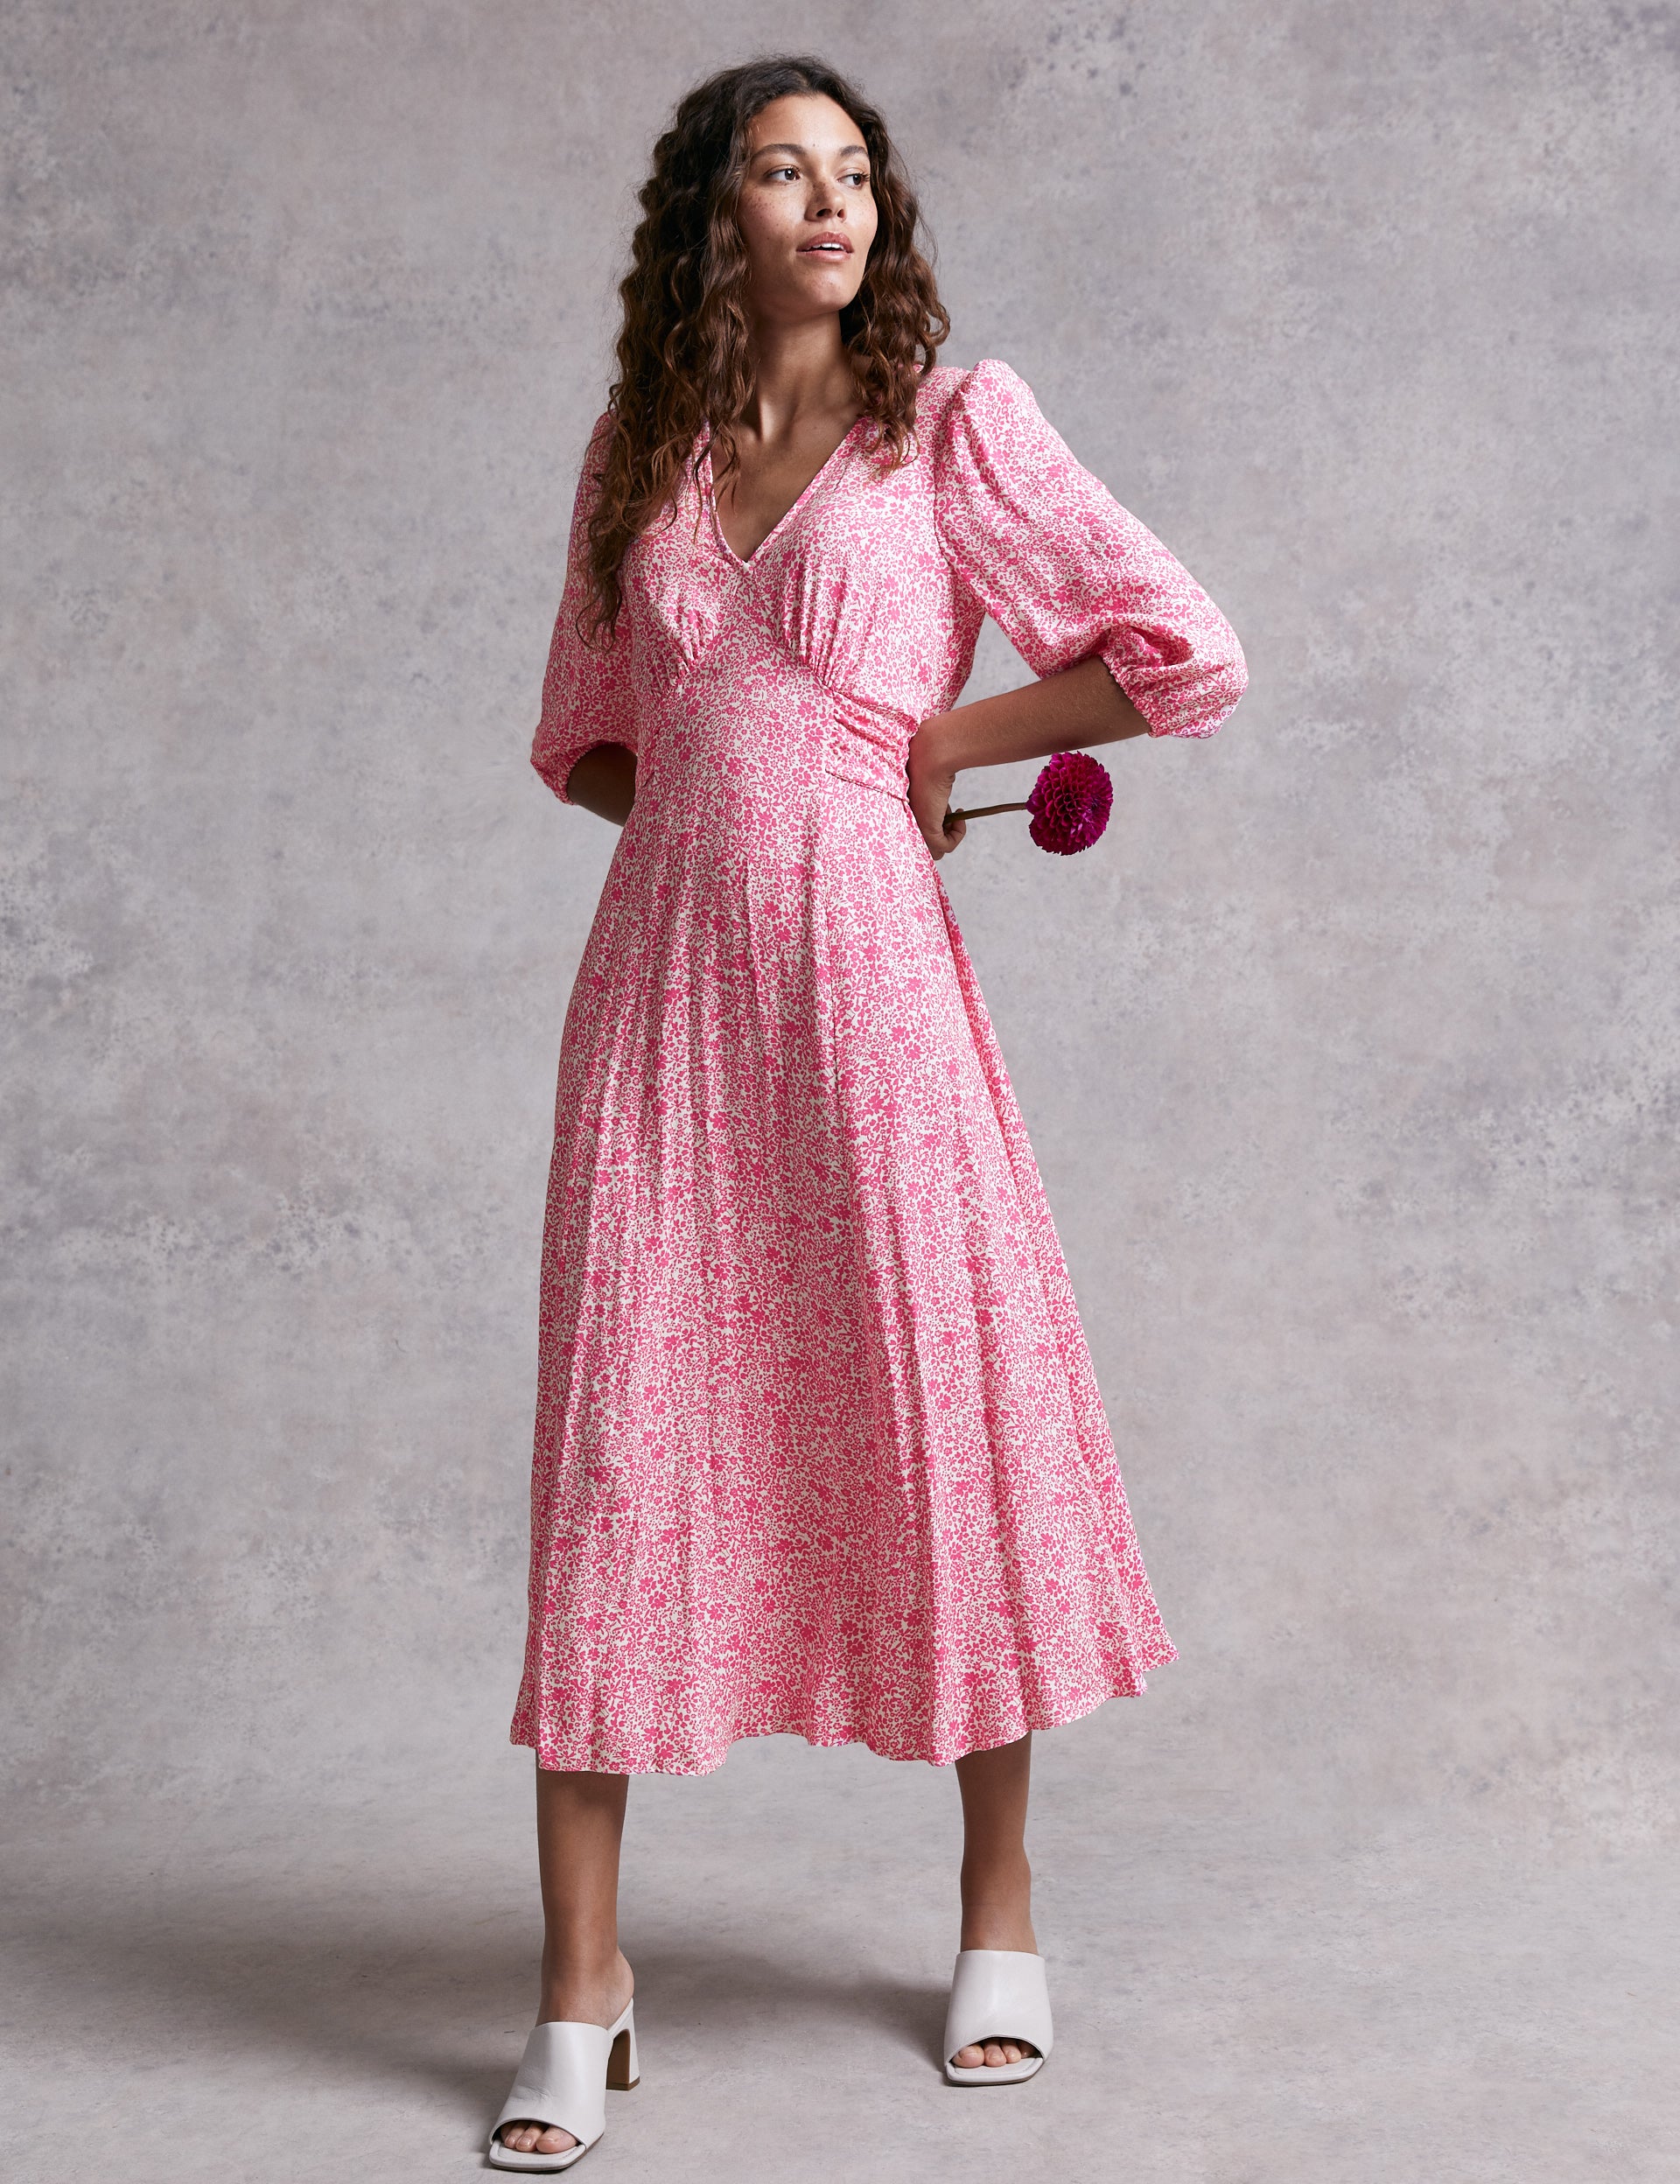 M&S X Ghost Floral V Neck Midi Dress product image